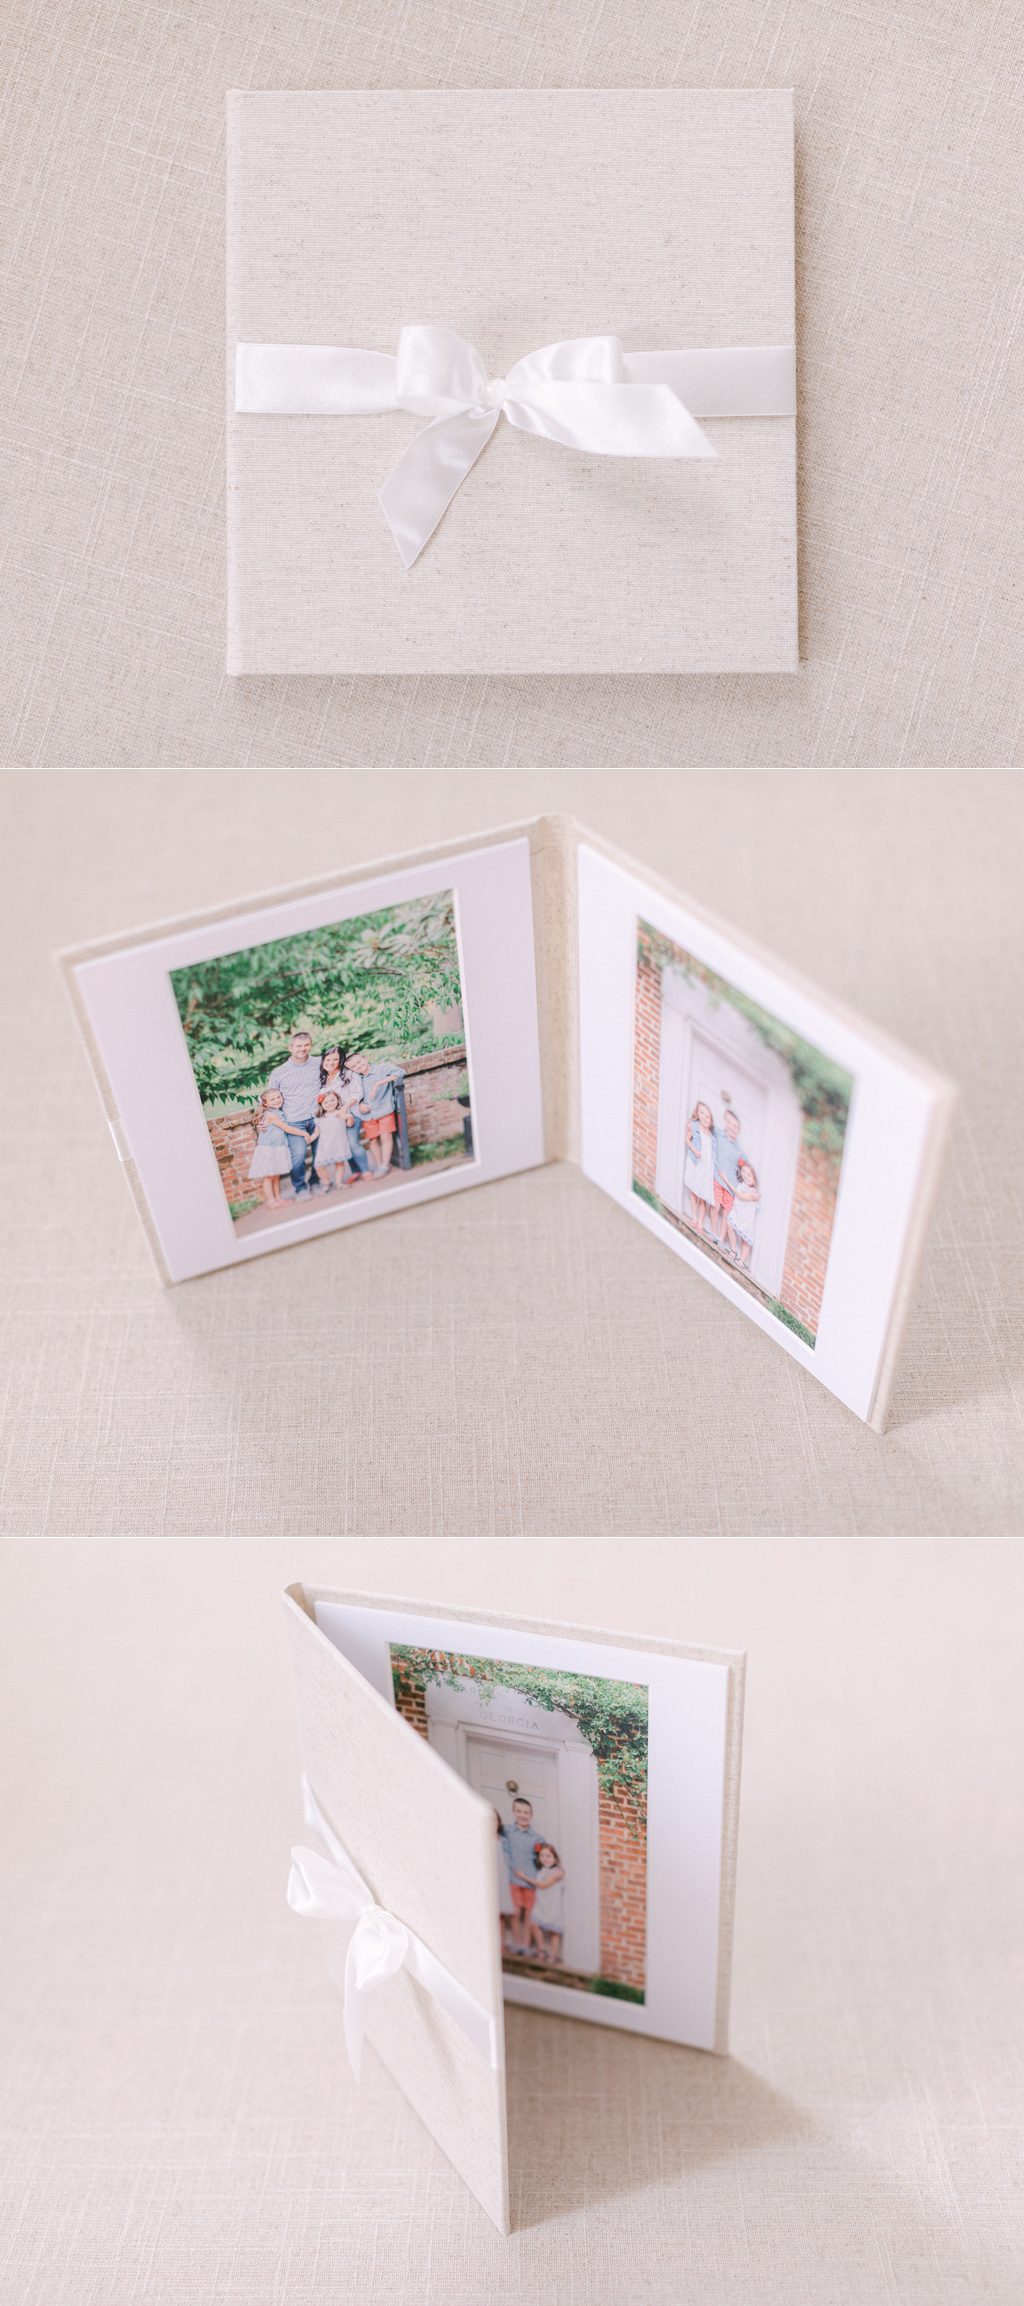 Folio pictures showing one of the many family portrait products offered by Athens, GA photographers.